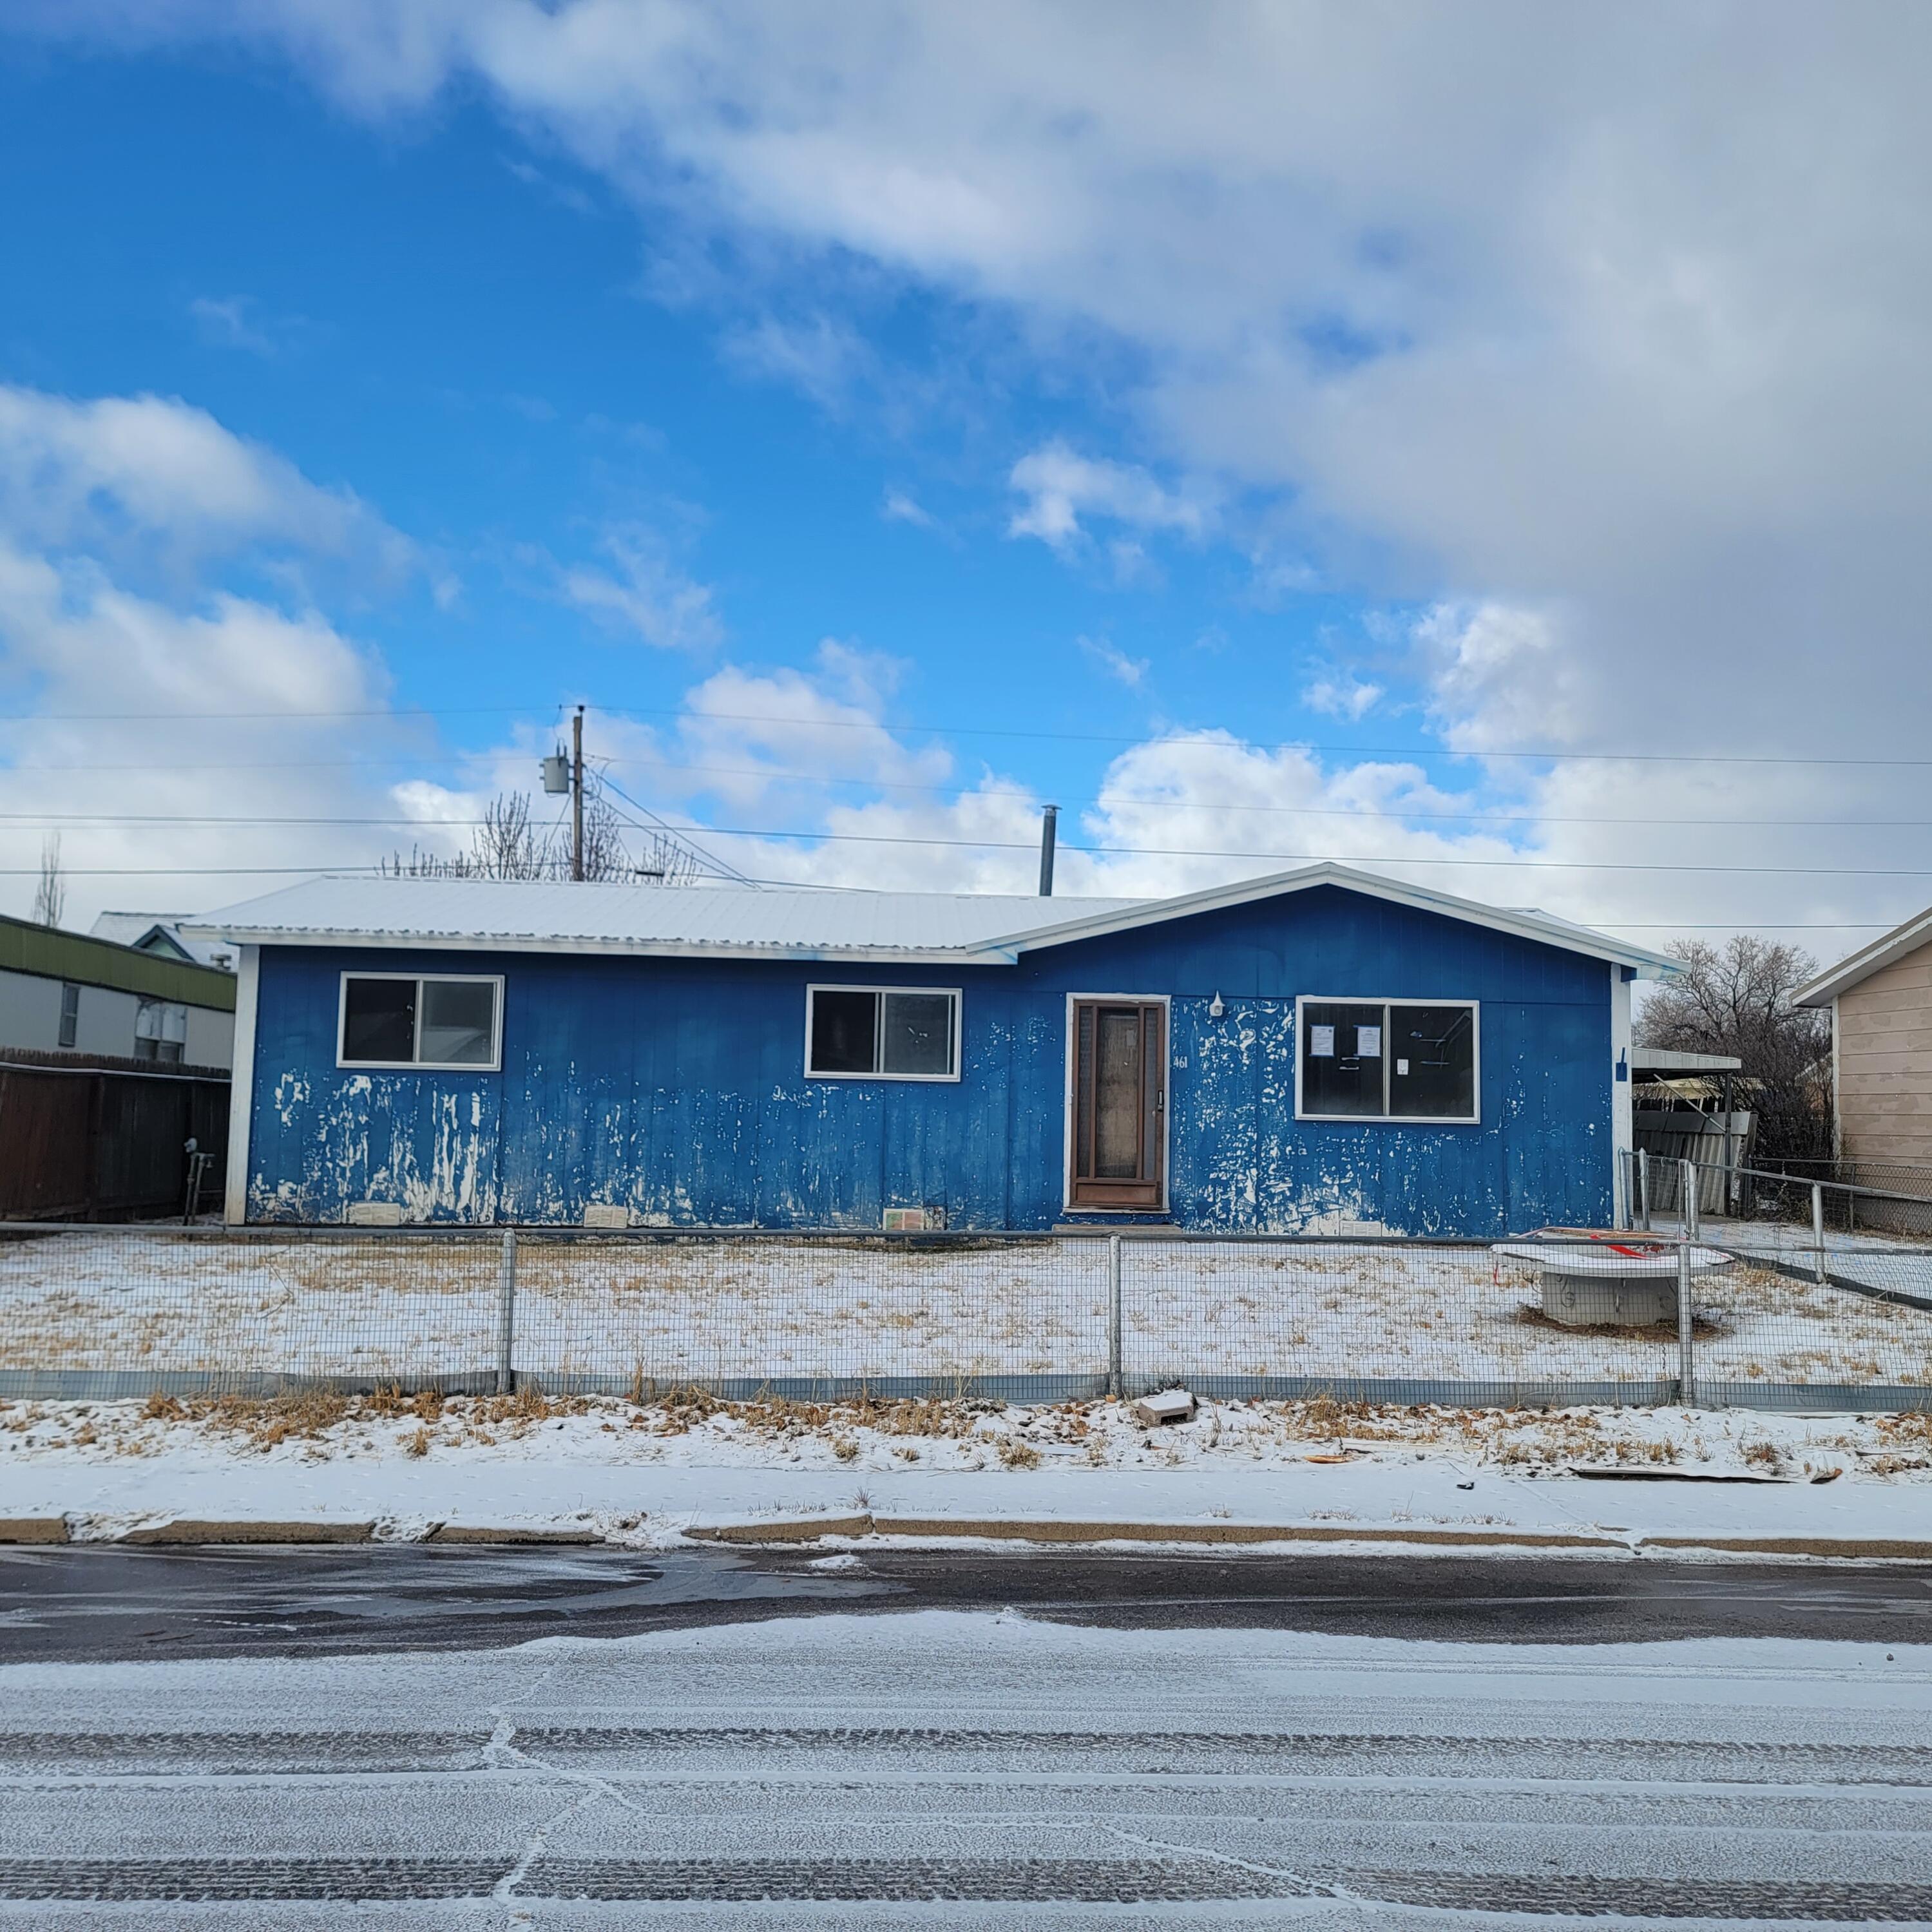 This 1-story home on a large lot features 3 bedrooms, 1.75 bathrooms, storage shed/workshop and a 1 car carport. Great price on this home, show and sell today! Home is eligible for $100 down payment program when using FHA 203 (b) with escrow or FHA 203 (k) financing.